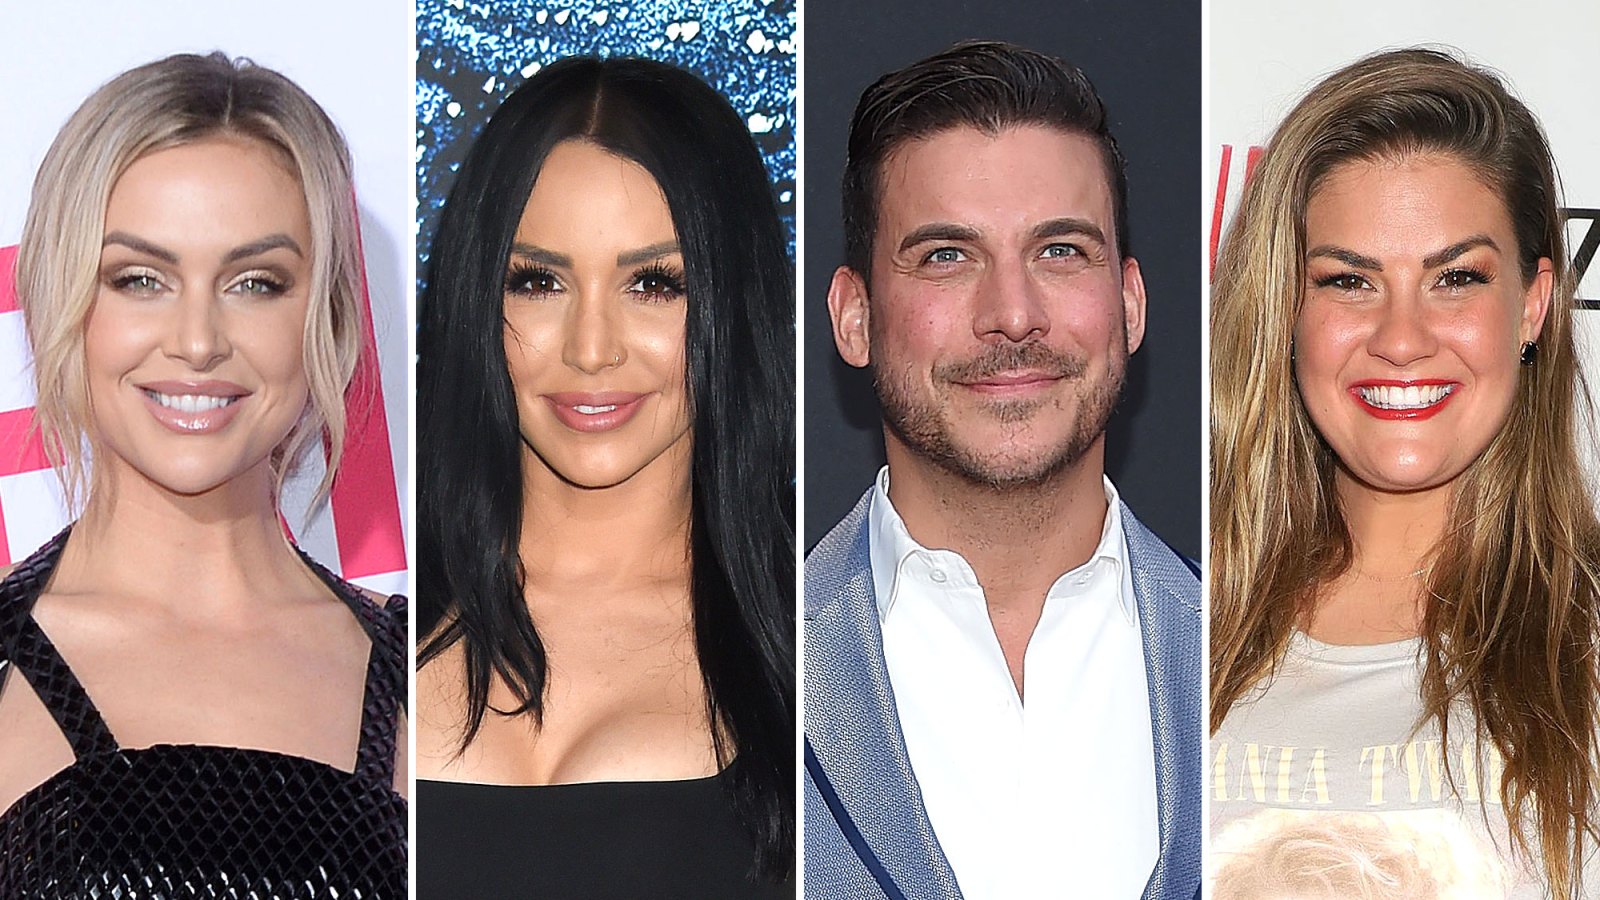 Lala Kent and Scheana Shay Both Attend Jax Taylor and Brittany Cartwright Gender Reveal Party